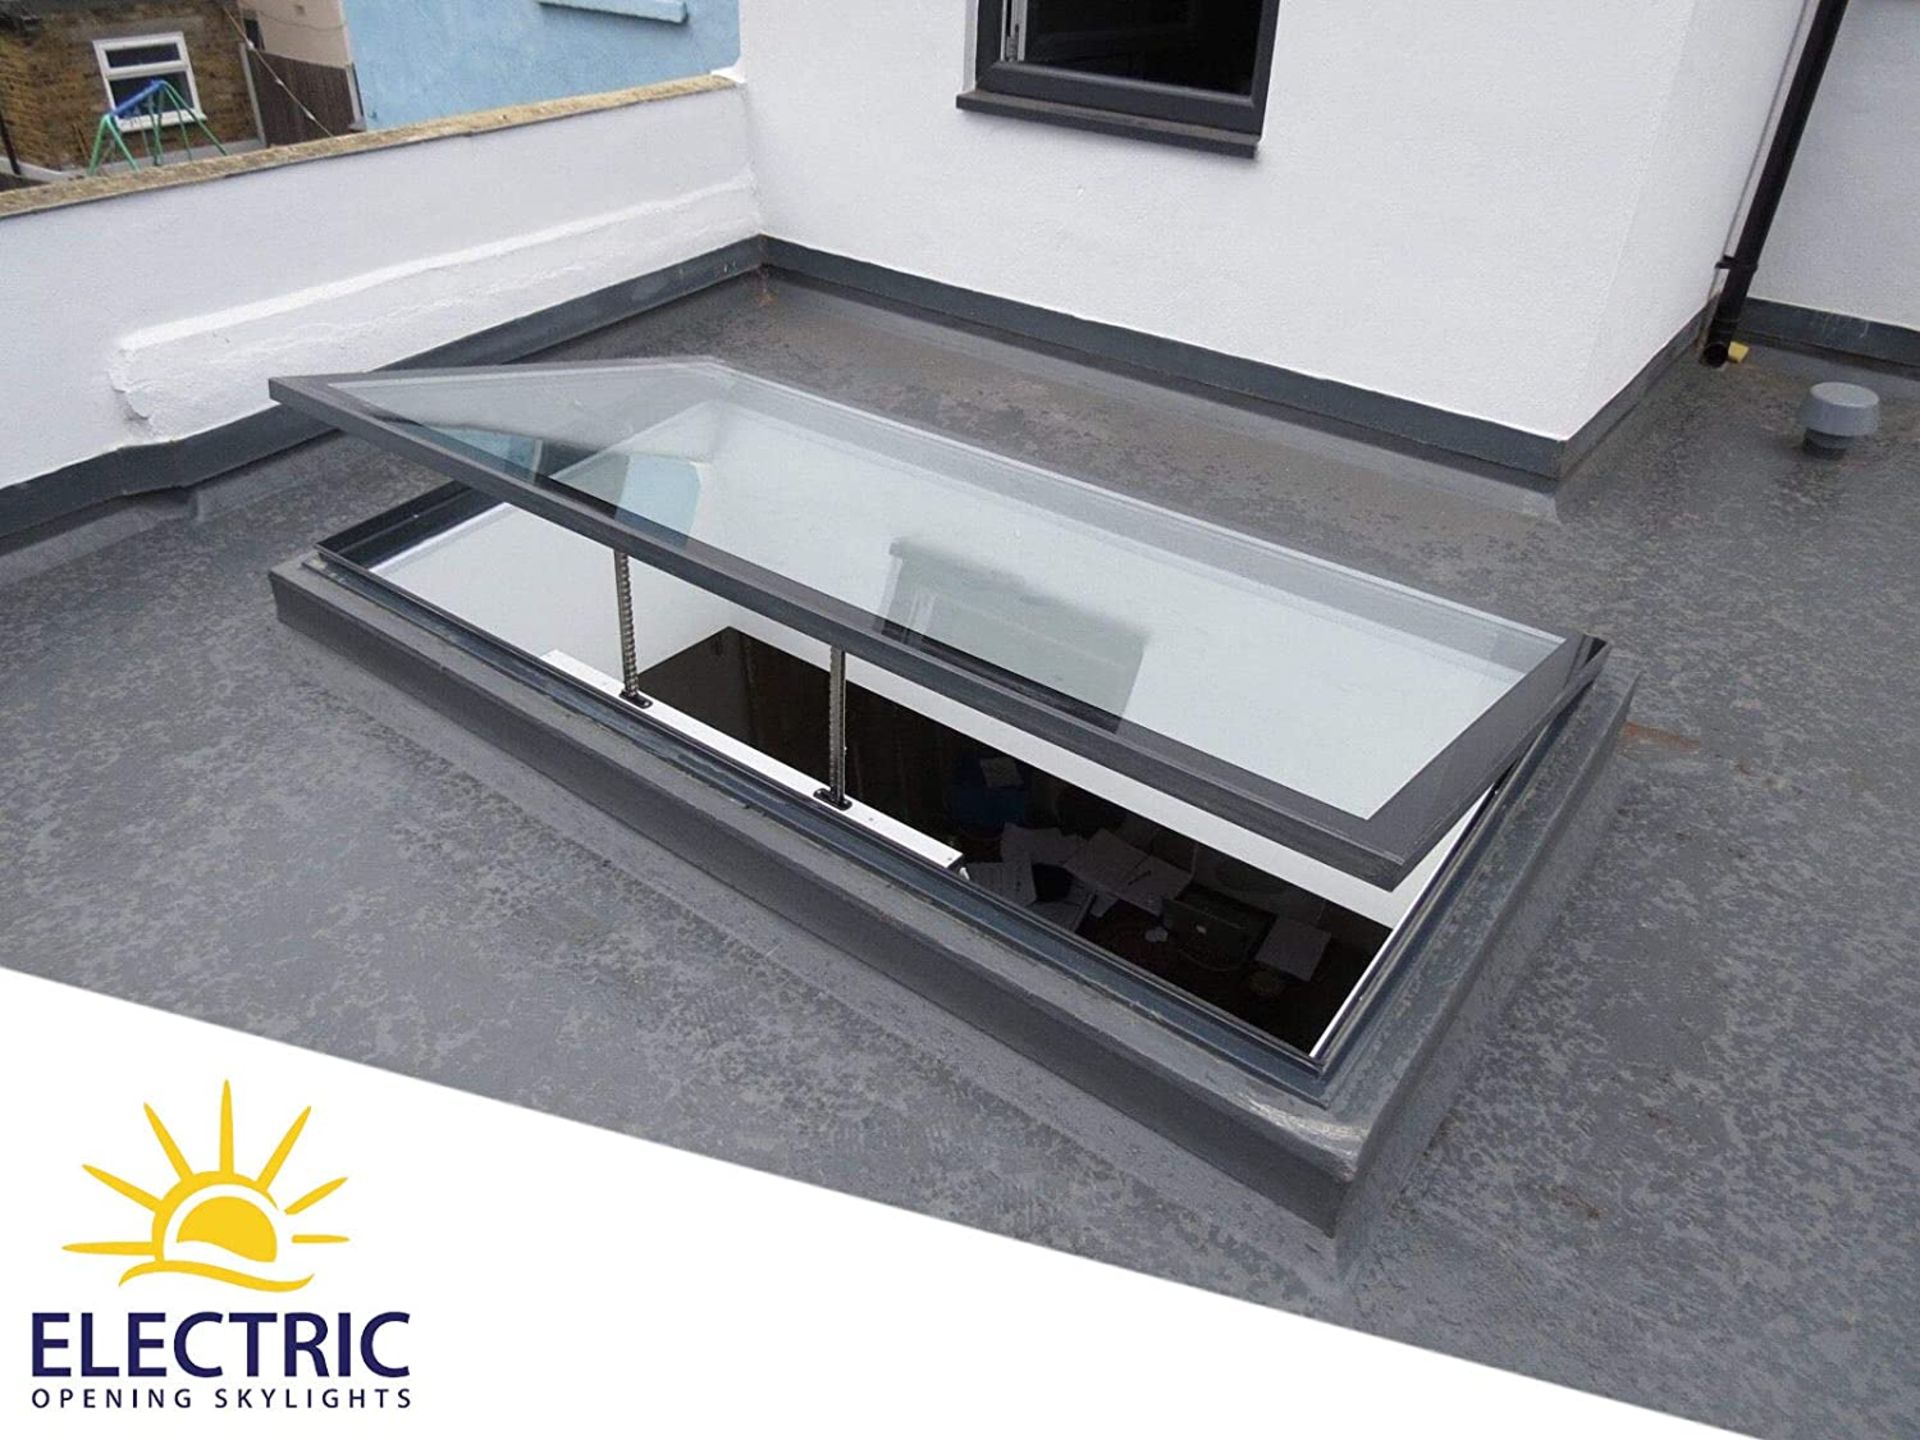 Panoroof (EOS) Electric Opening Skylight 1000x1500mm - Aluminiun Frame Double Glazed Laminated